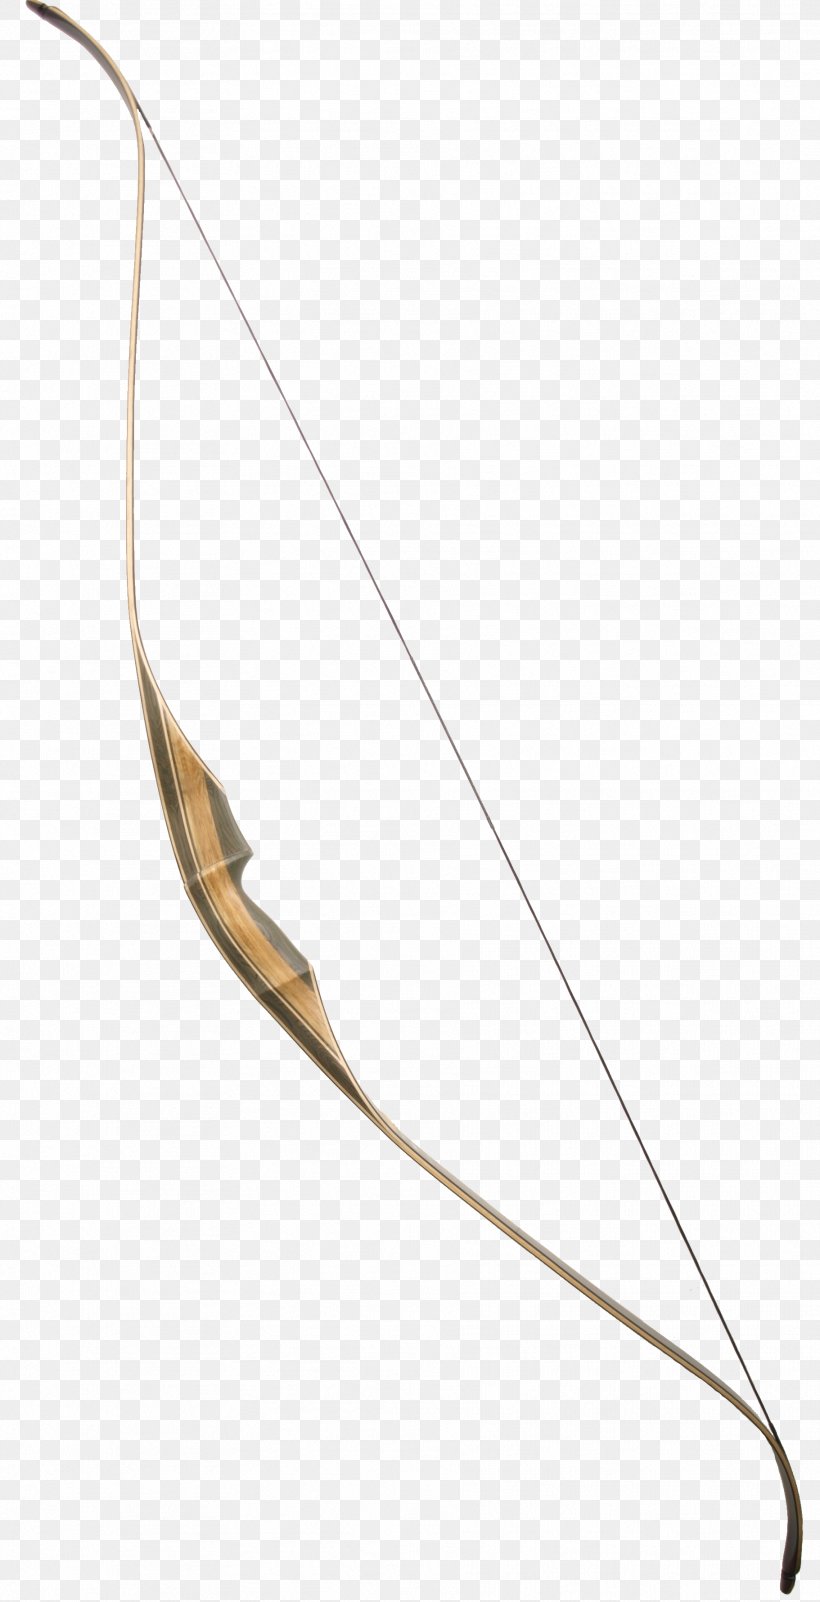 Longbow Black Ghost Knifefish Sikorsky UH-60 Black Hawk Recurve Bow, PNG, 1822x3561px, Longbow, Bad Wolf, Black Ghost Knifefish, Bow, Bow And Arrow Download Free